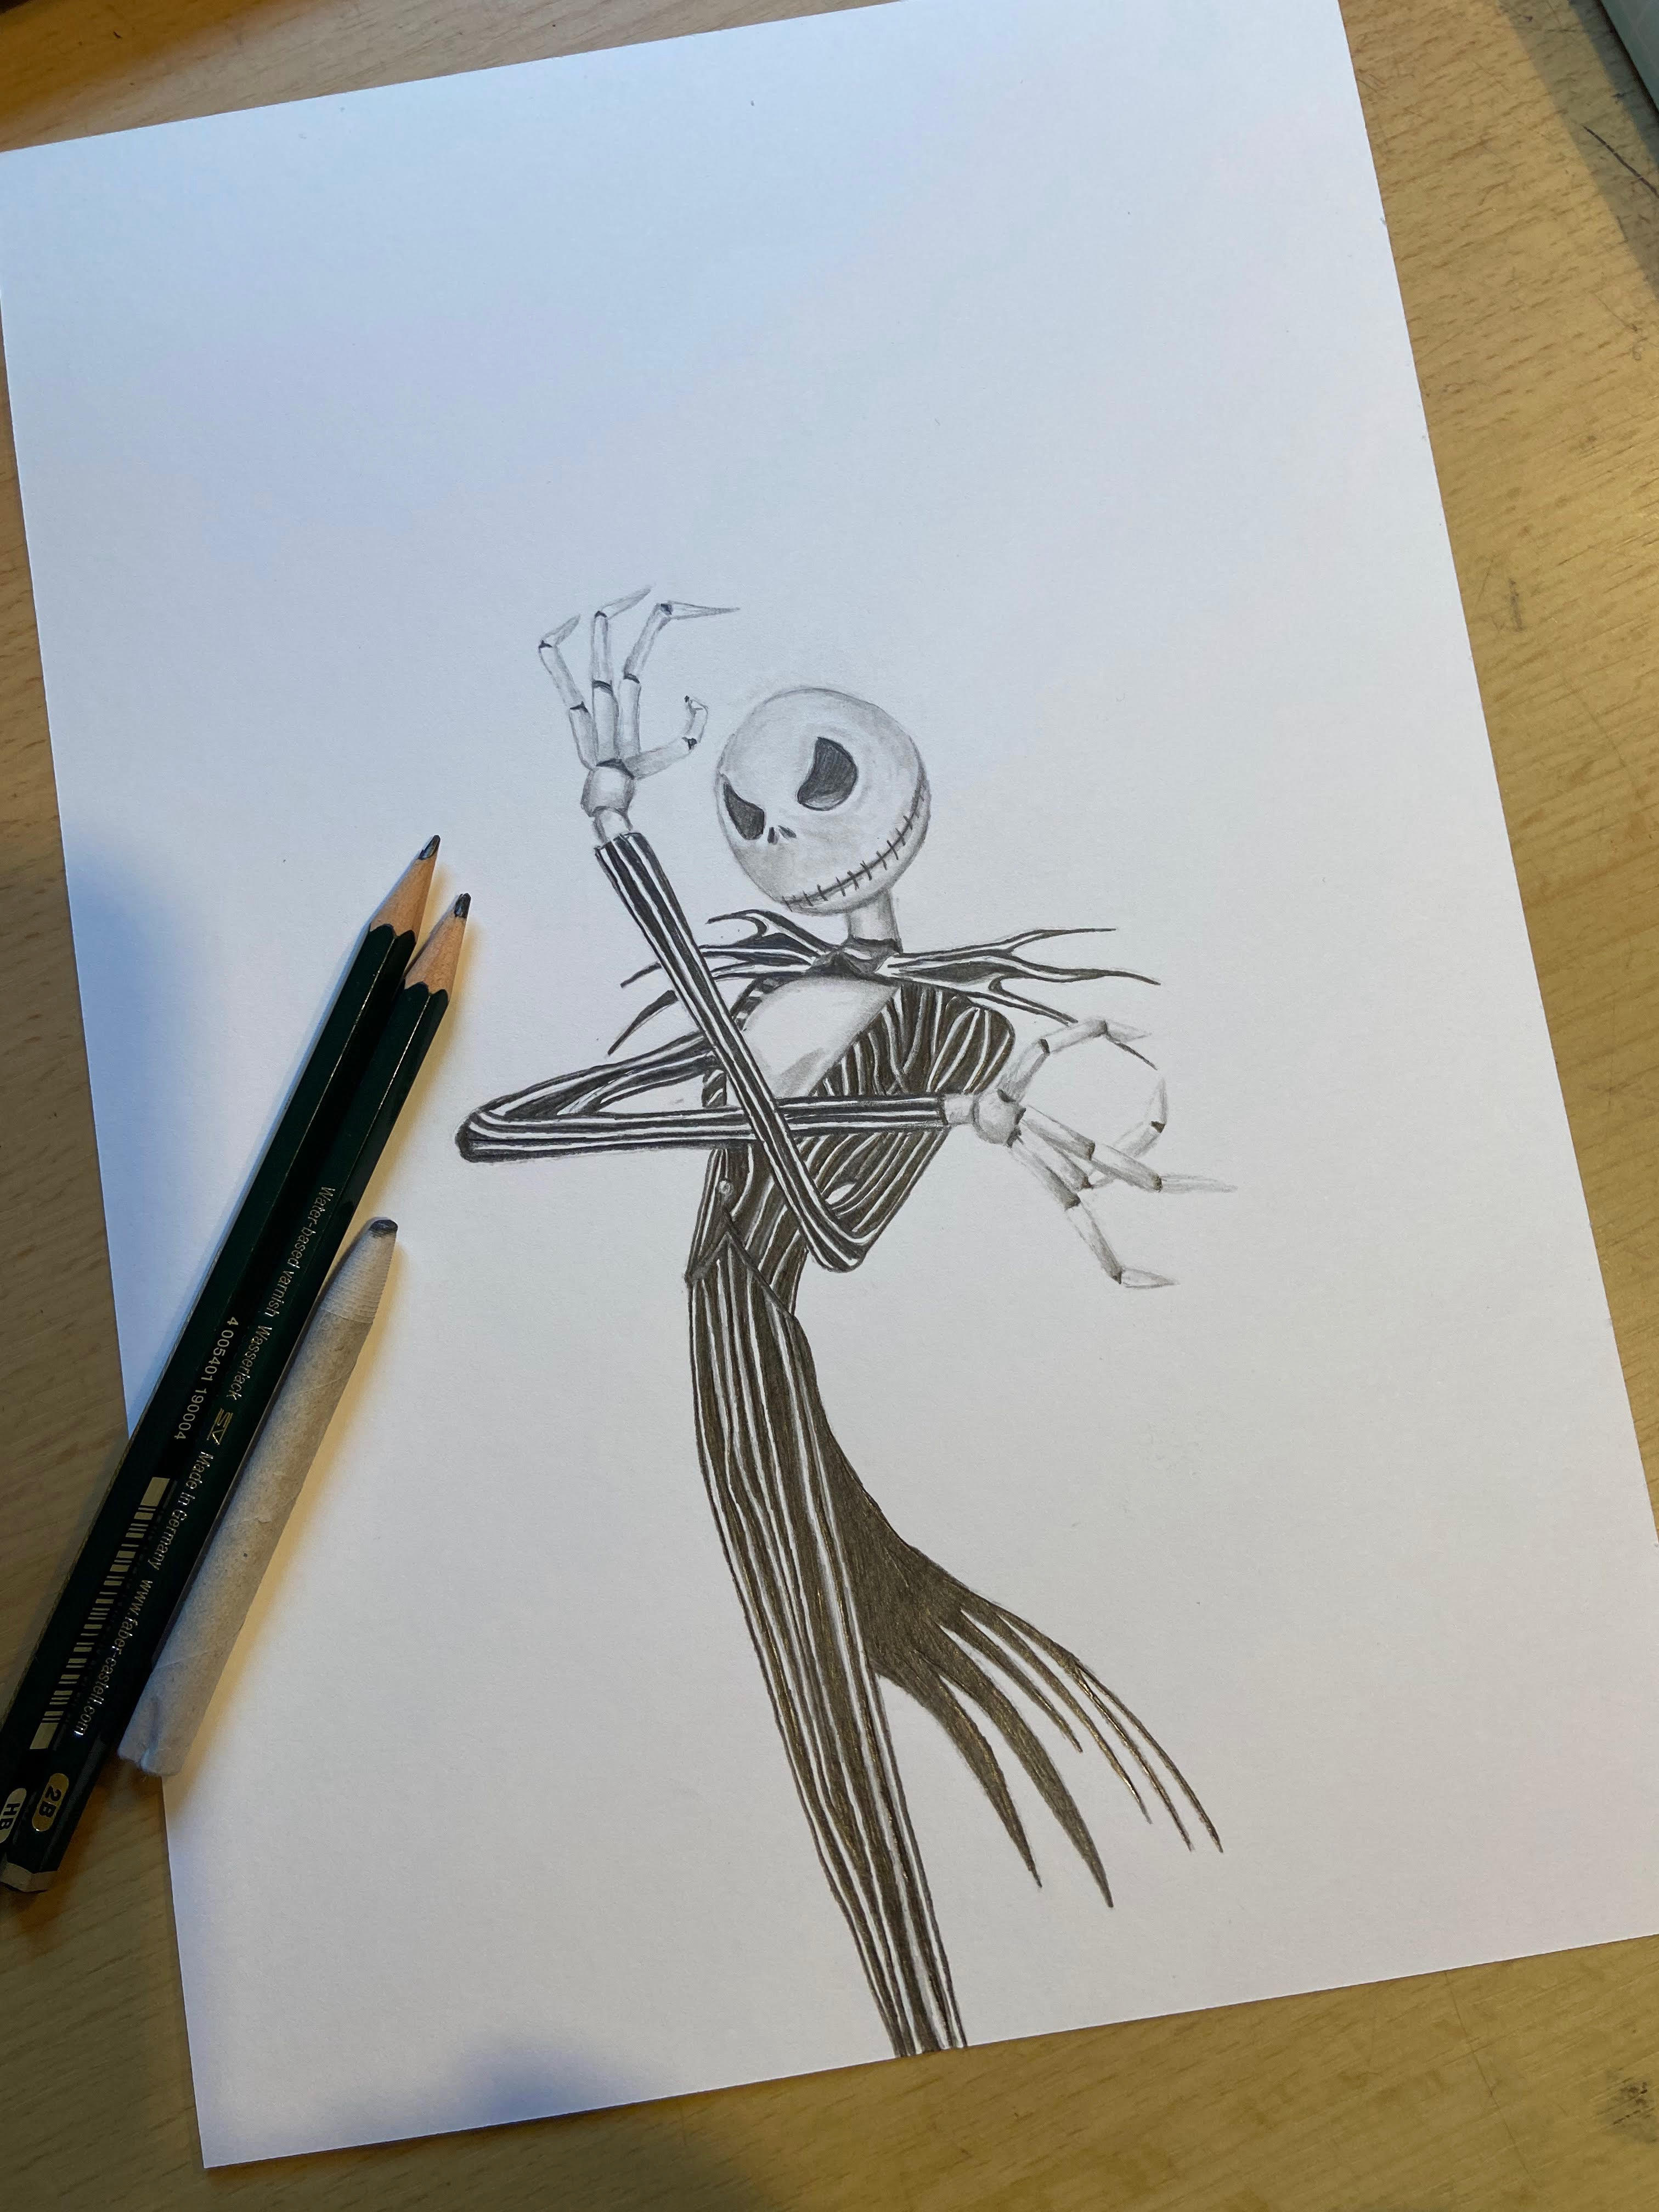 Pencil drawing of Jack Skellington from 'The Nightmare before Christmas'